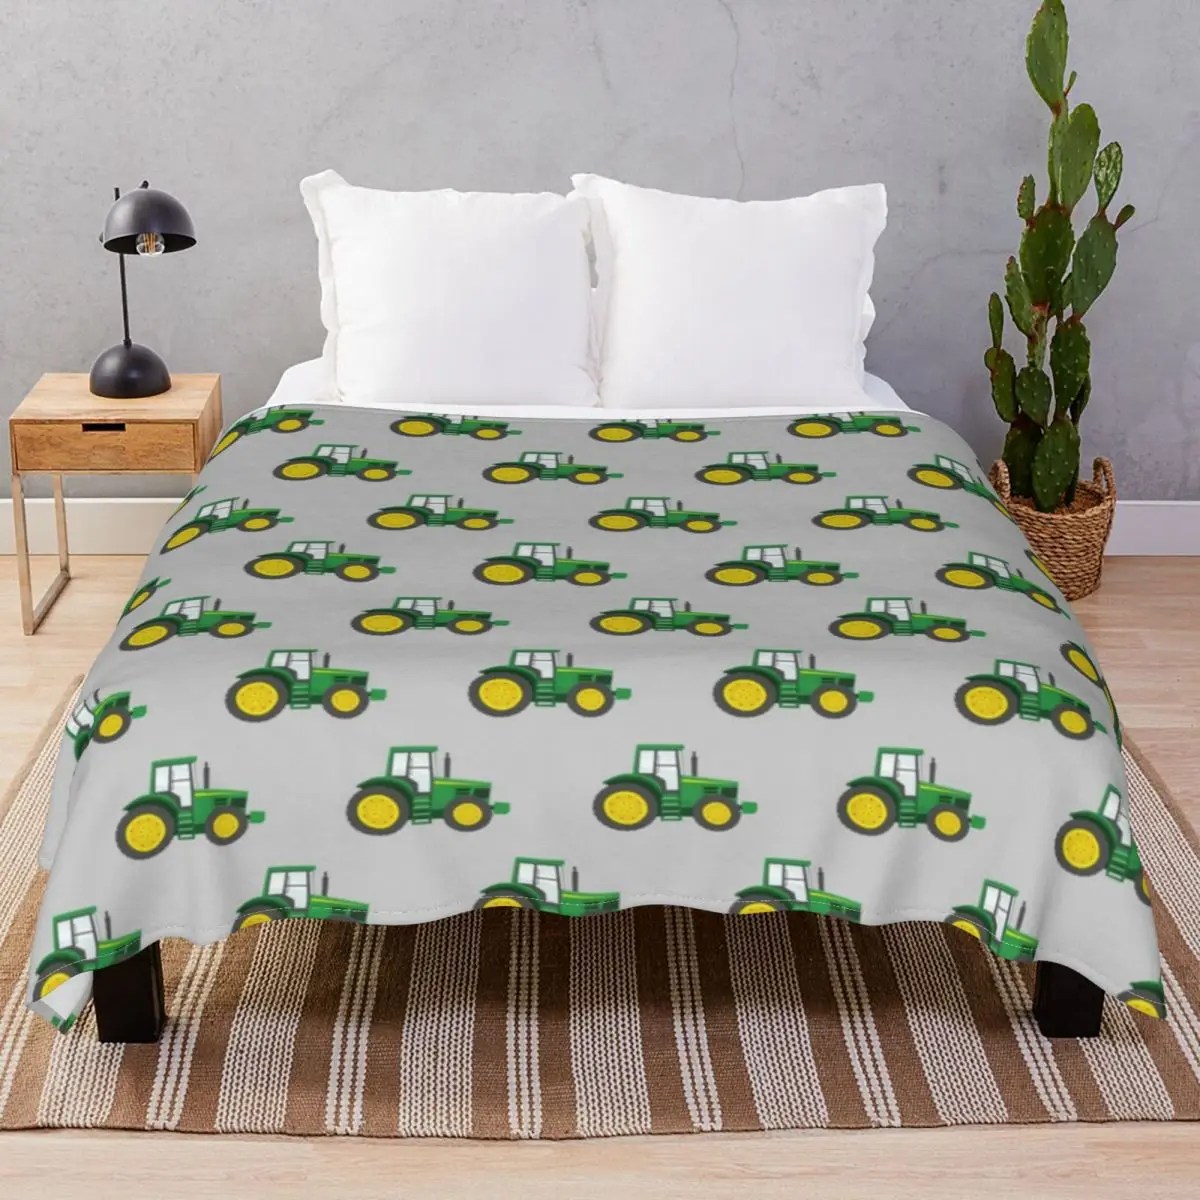 Green Tractors On Grey Farm Blanket Velvet All Season Ultra-Soft Throw Blankets for Bedding Home Couch Travel Office